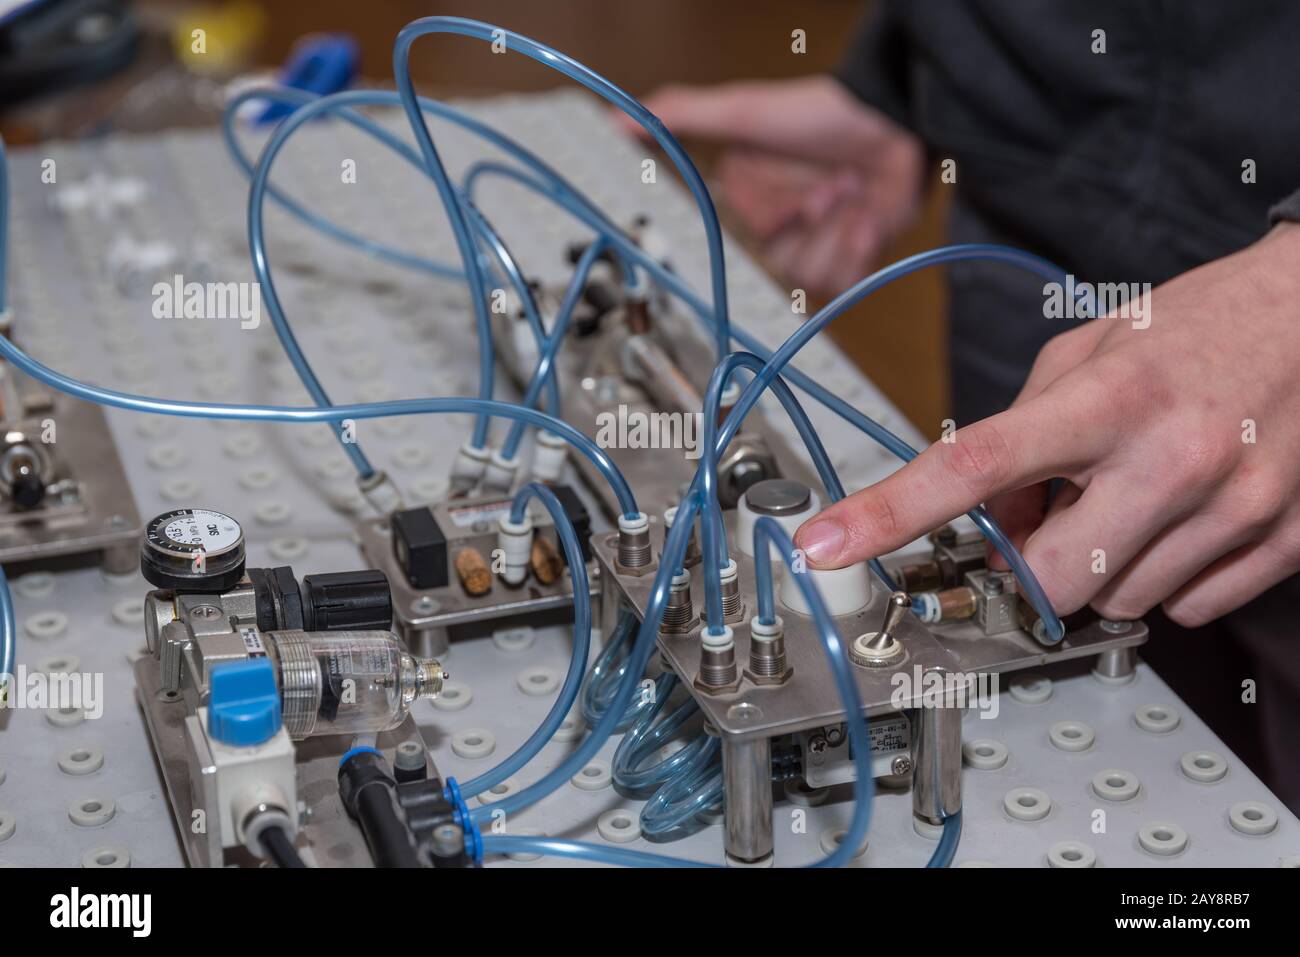 Using pneumatics on a machine at the push of a button - close-up Stock Photo